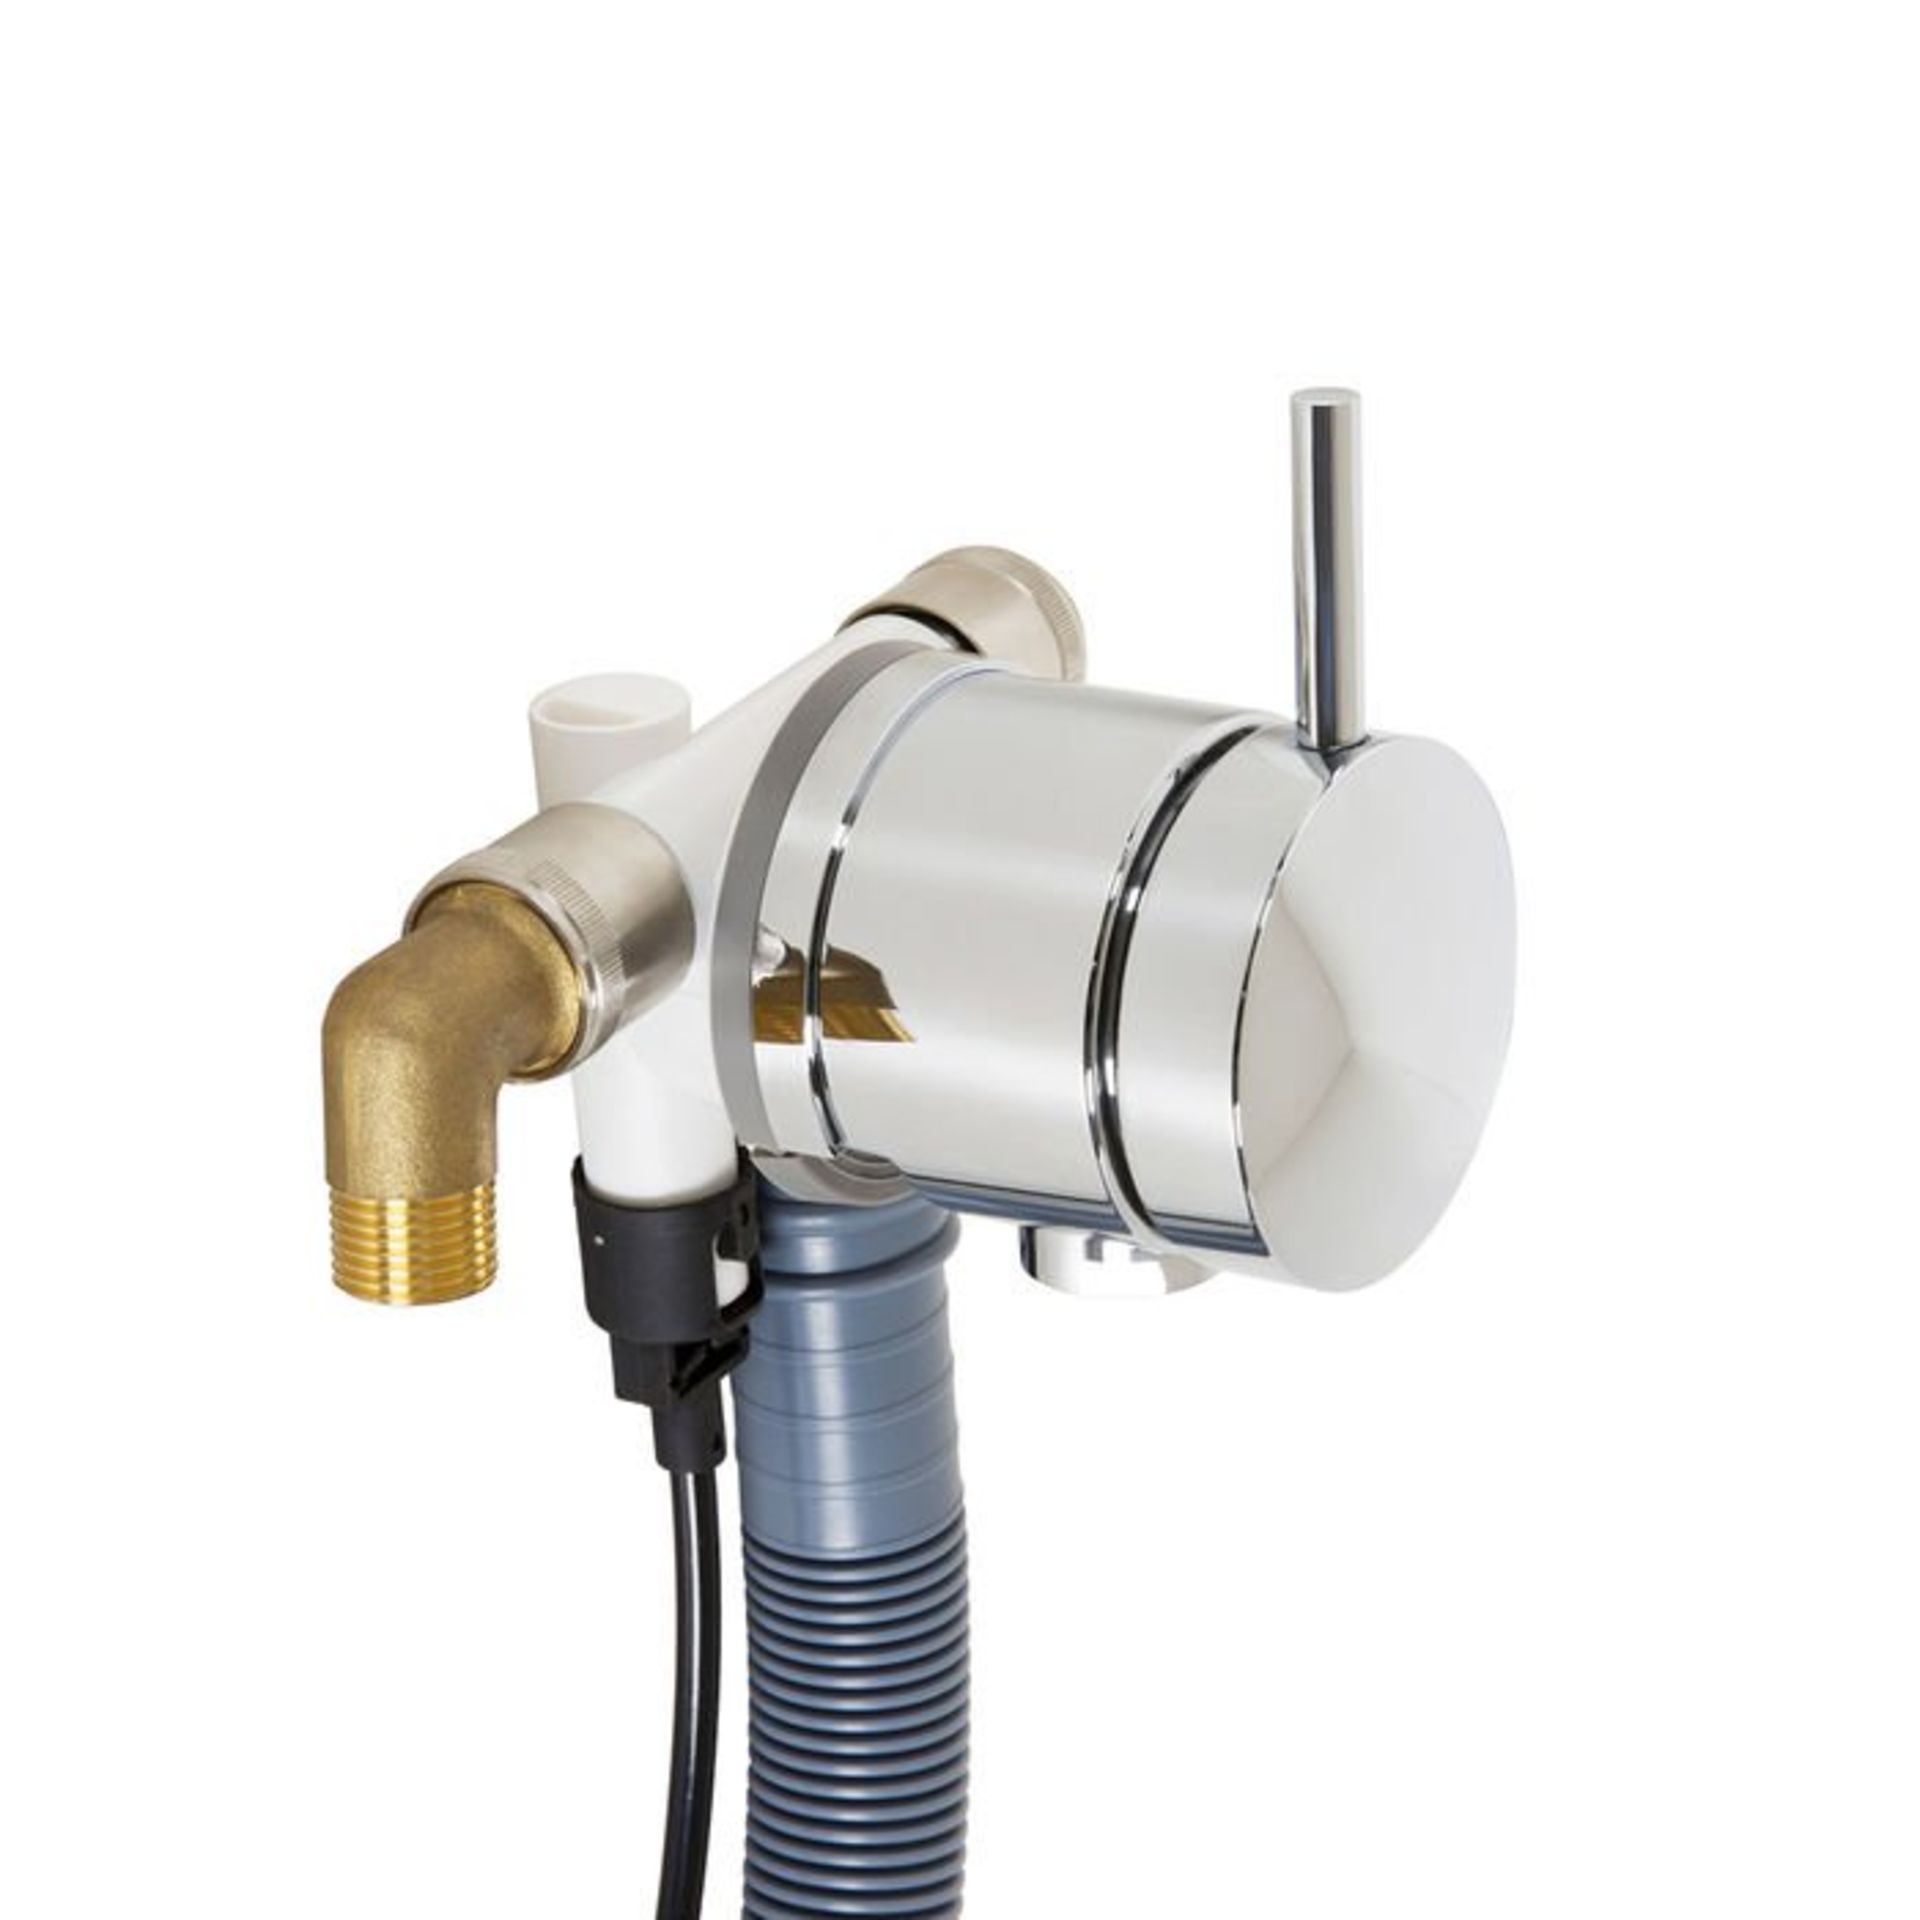 (S107) Bath Filler Waste Overflow Kit - Pop-Up RRP £74.99 Made with zinc with solid brass components - Image 3 of 3